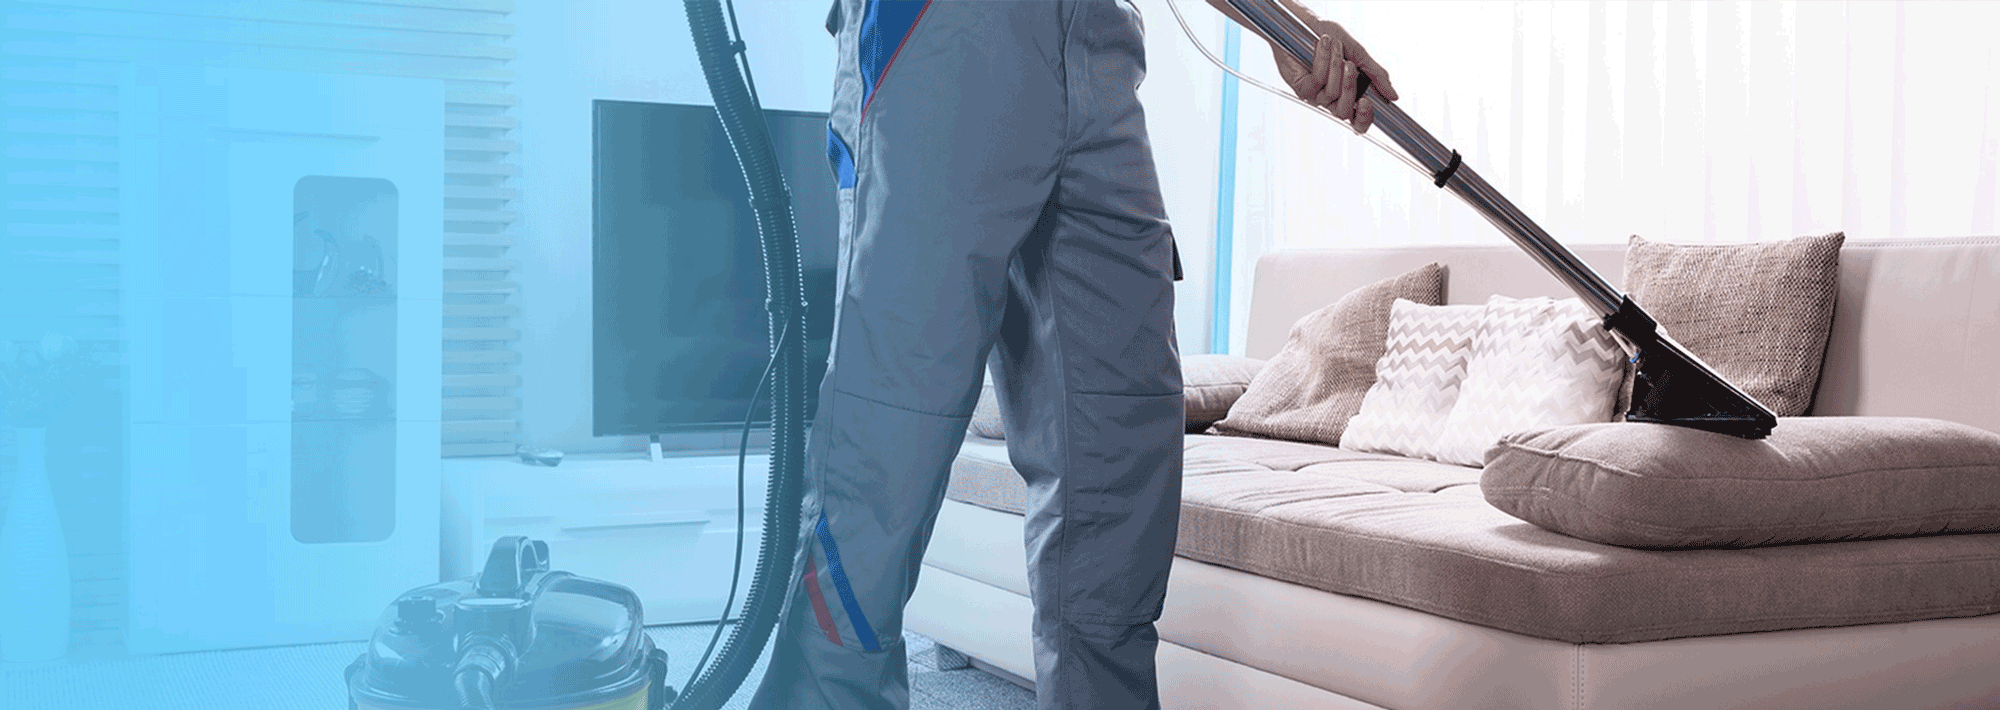 Heavy condition cleaning services